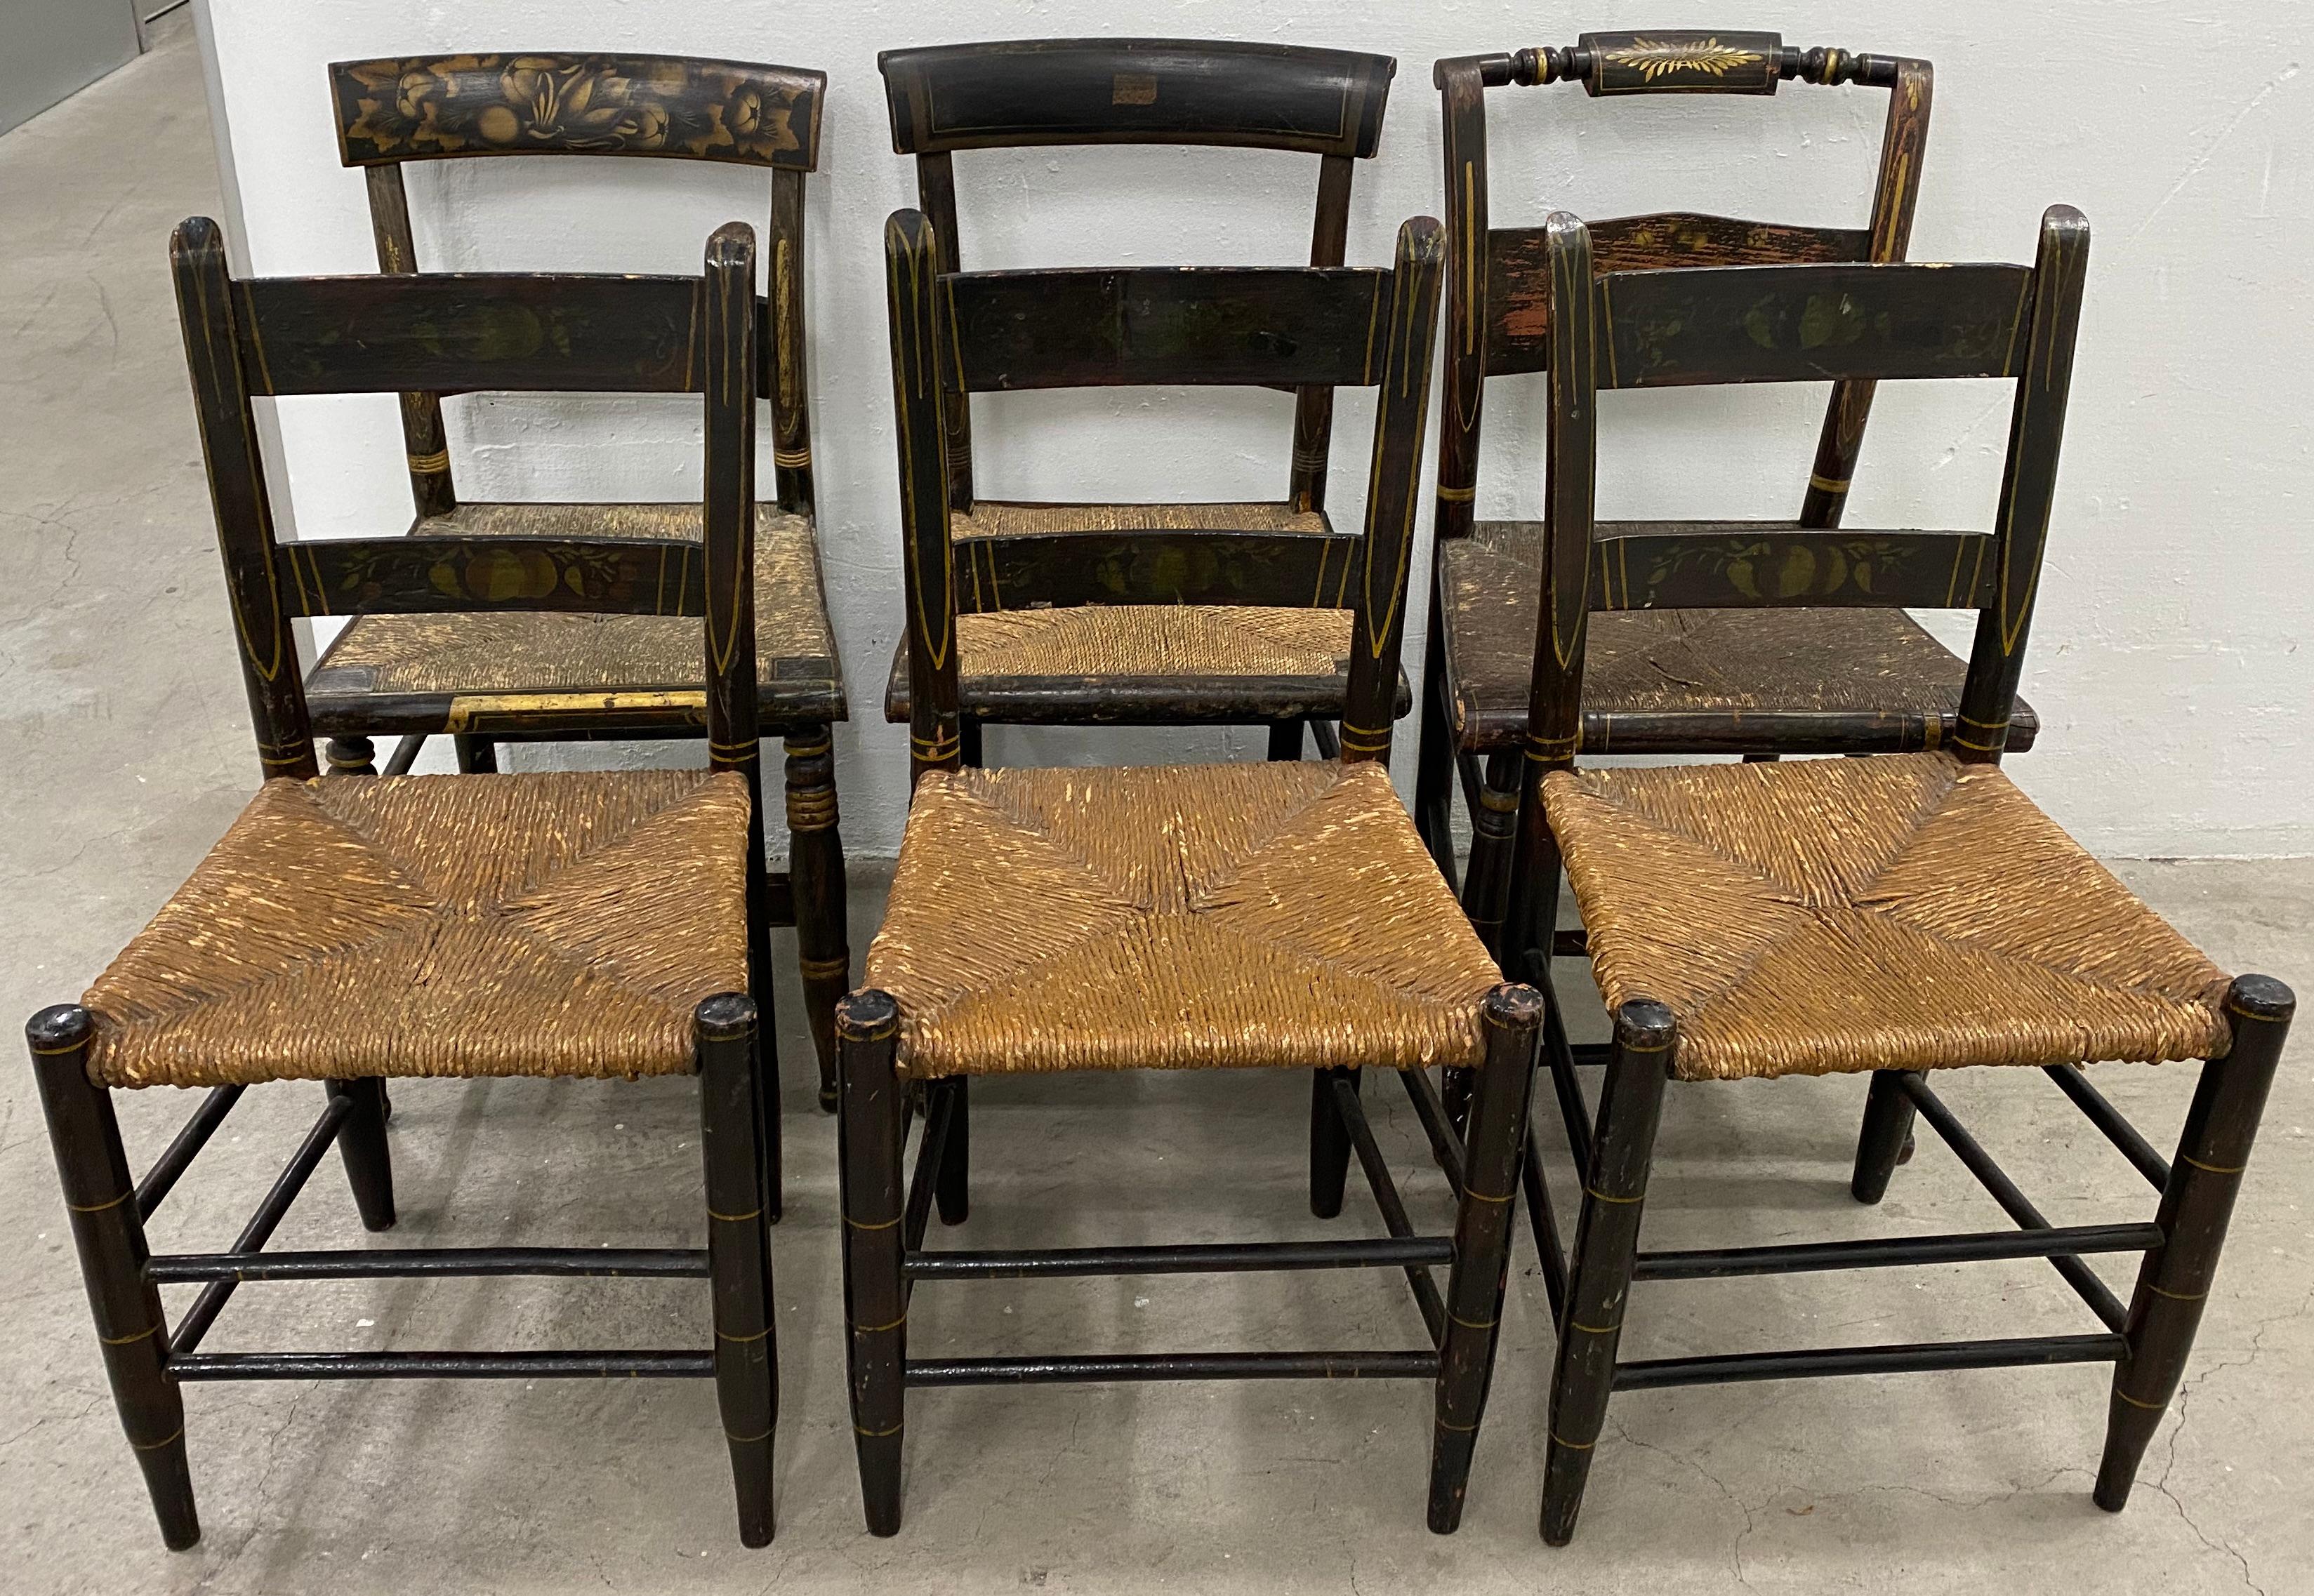 Lot of six mid-19th century Mis-Matched American Hitchcock side chairs

Each chair is handmade and hand stenciled / painted.

Approximate dimensions: 17